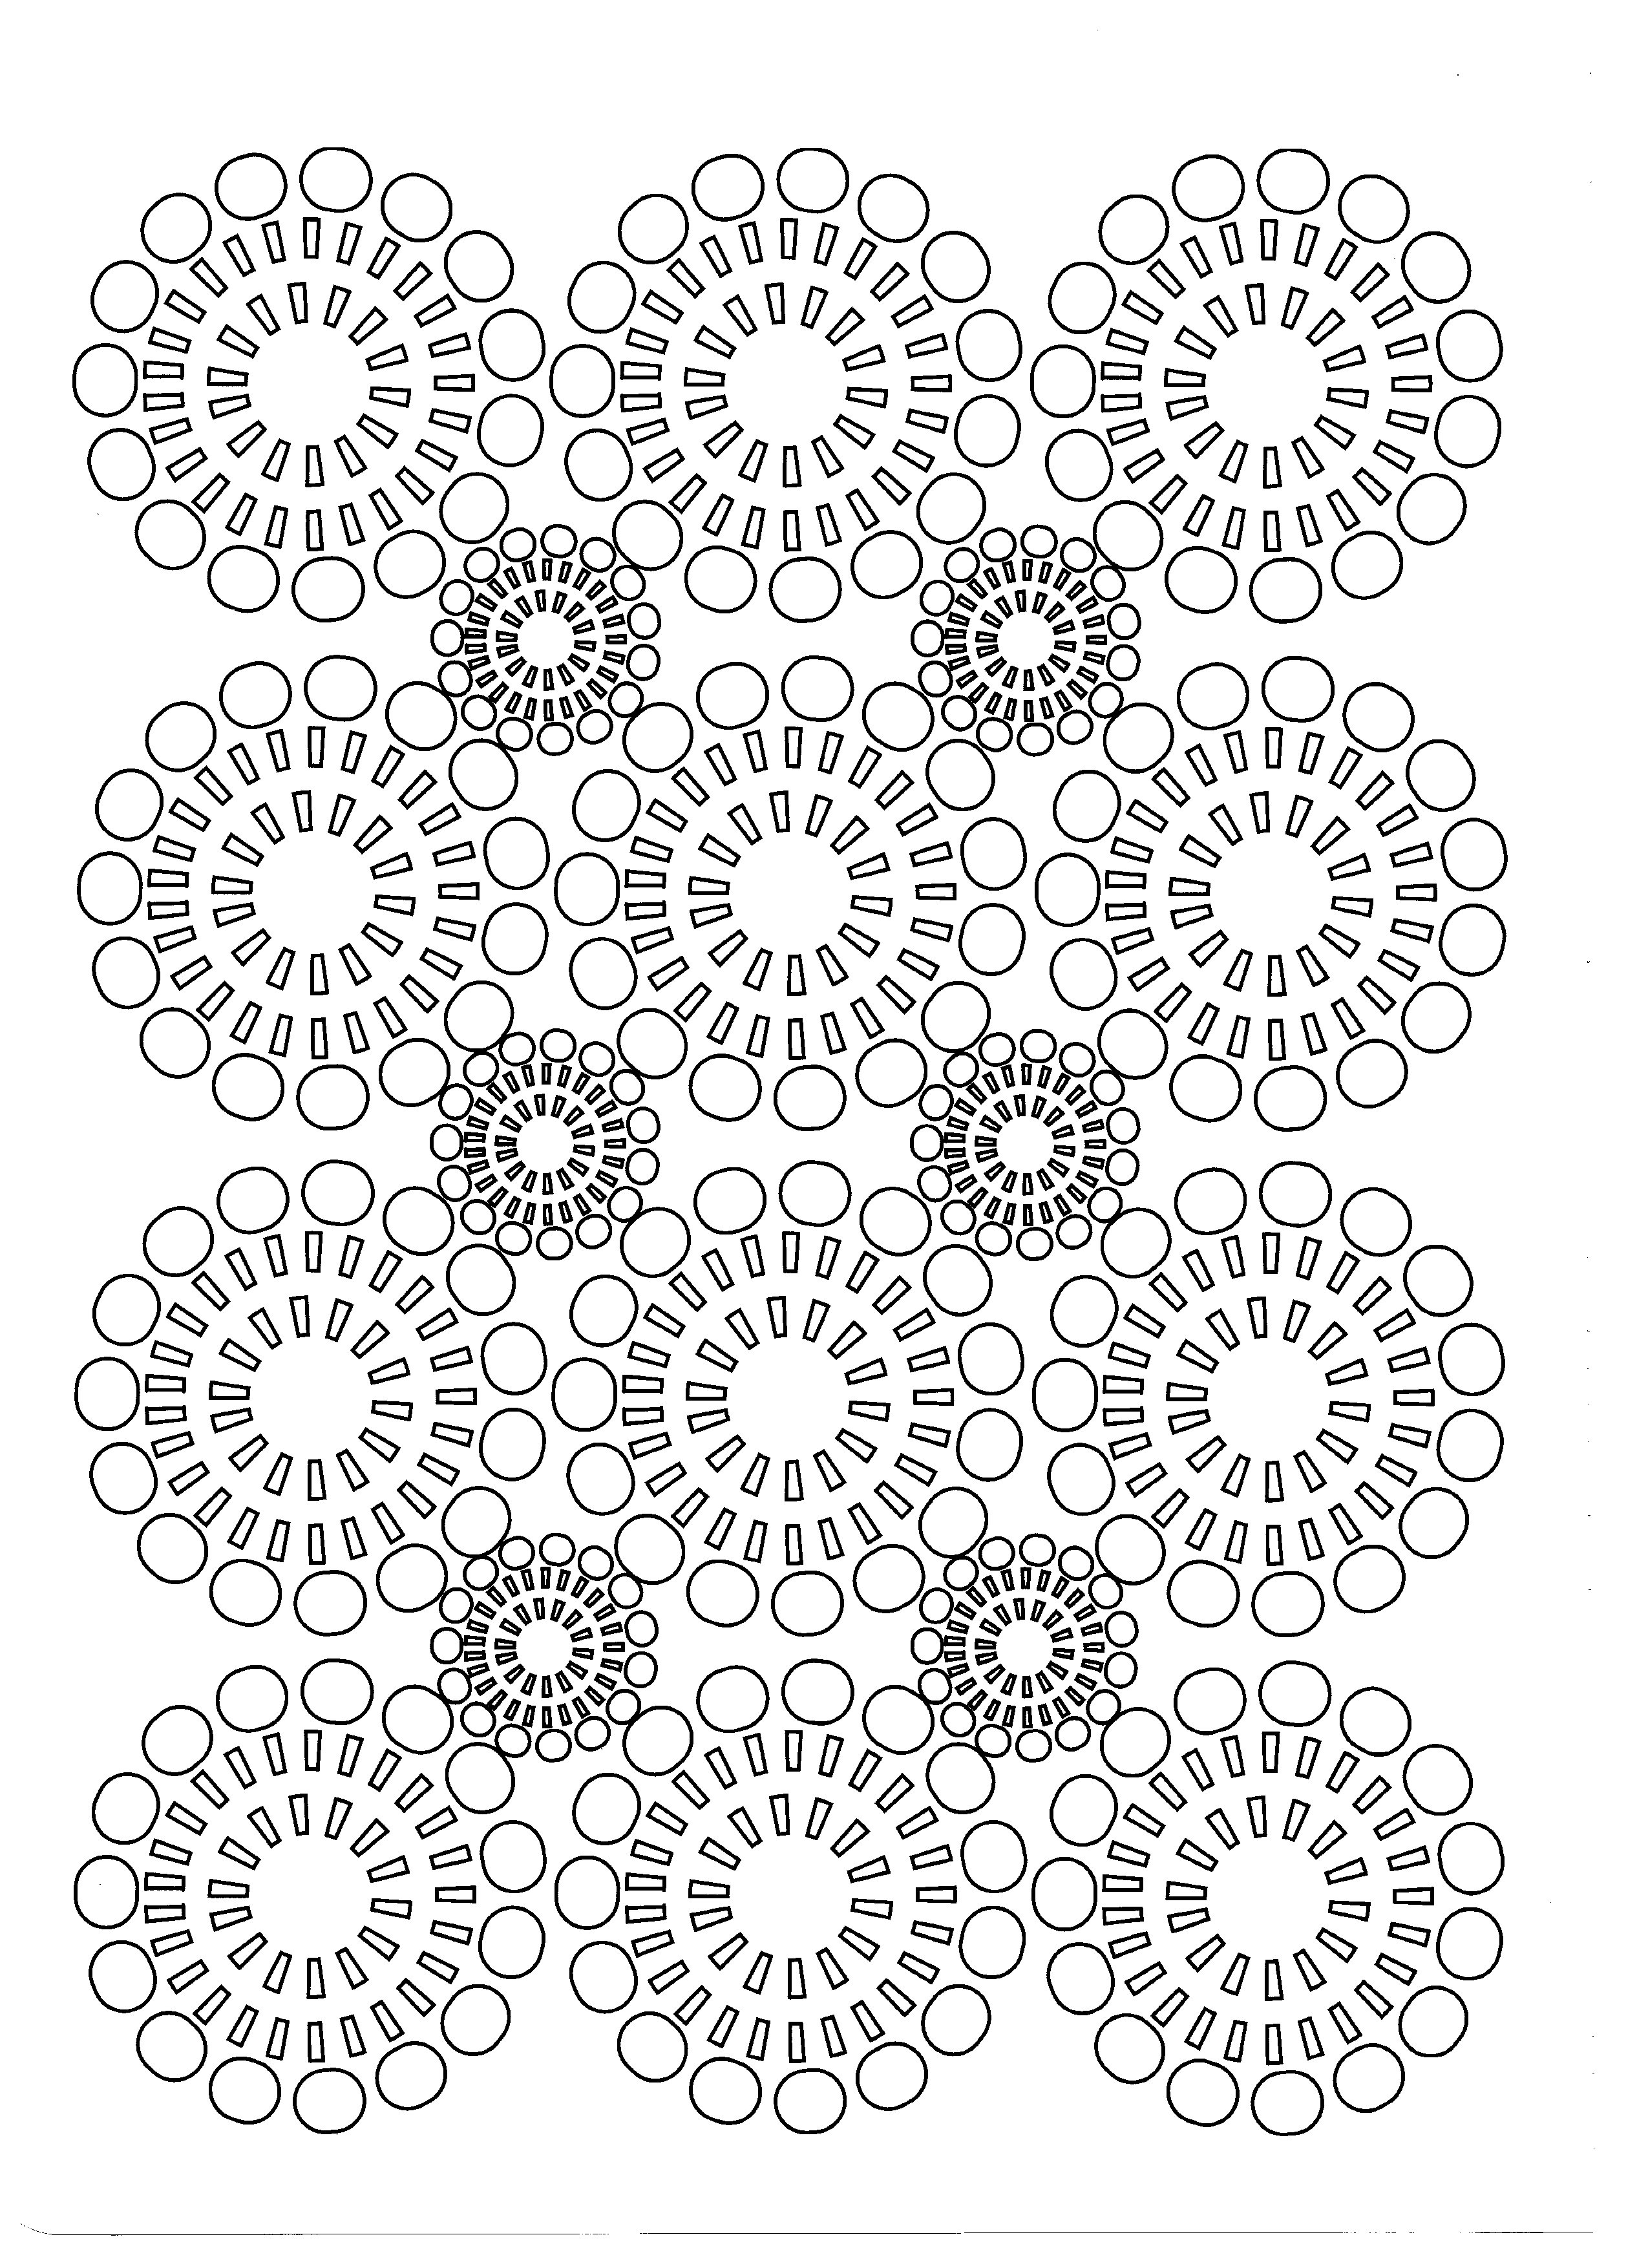 Symmetry - Coloring Pages for Adults